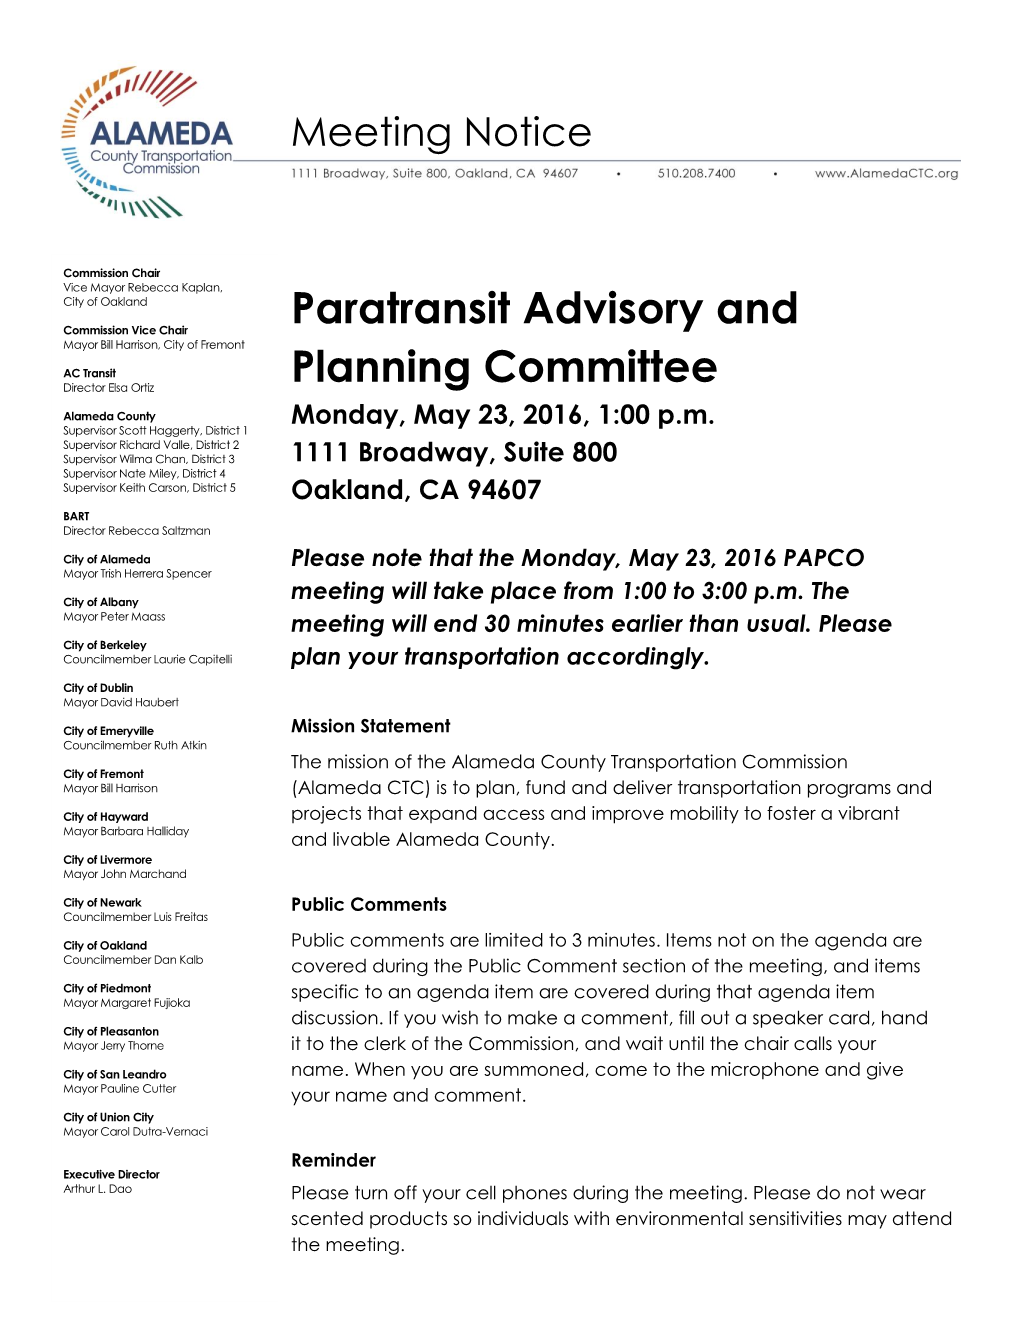 Paratransit Advisory and Planning Committee Meeting Minutes Monday, March 28, 2016, 1:00 P.M